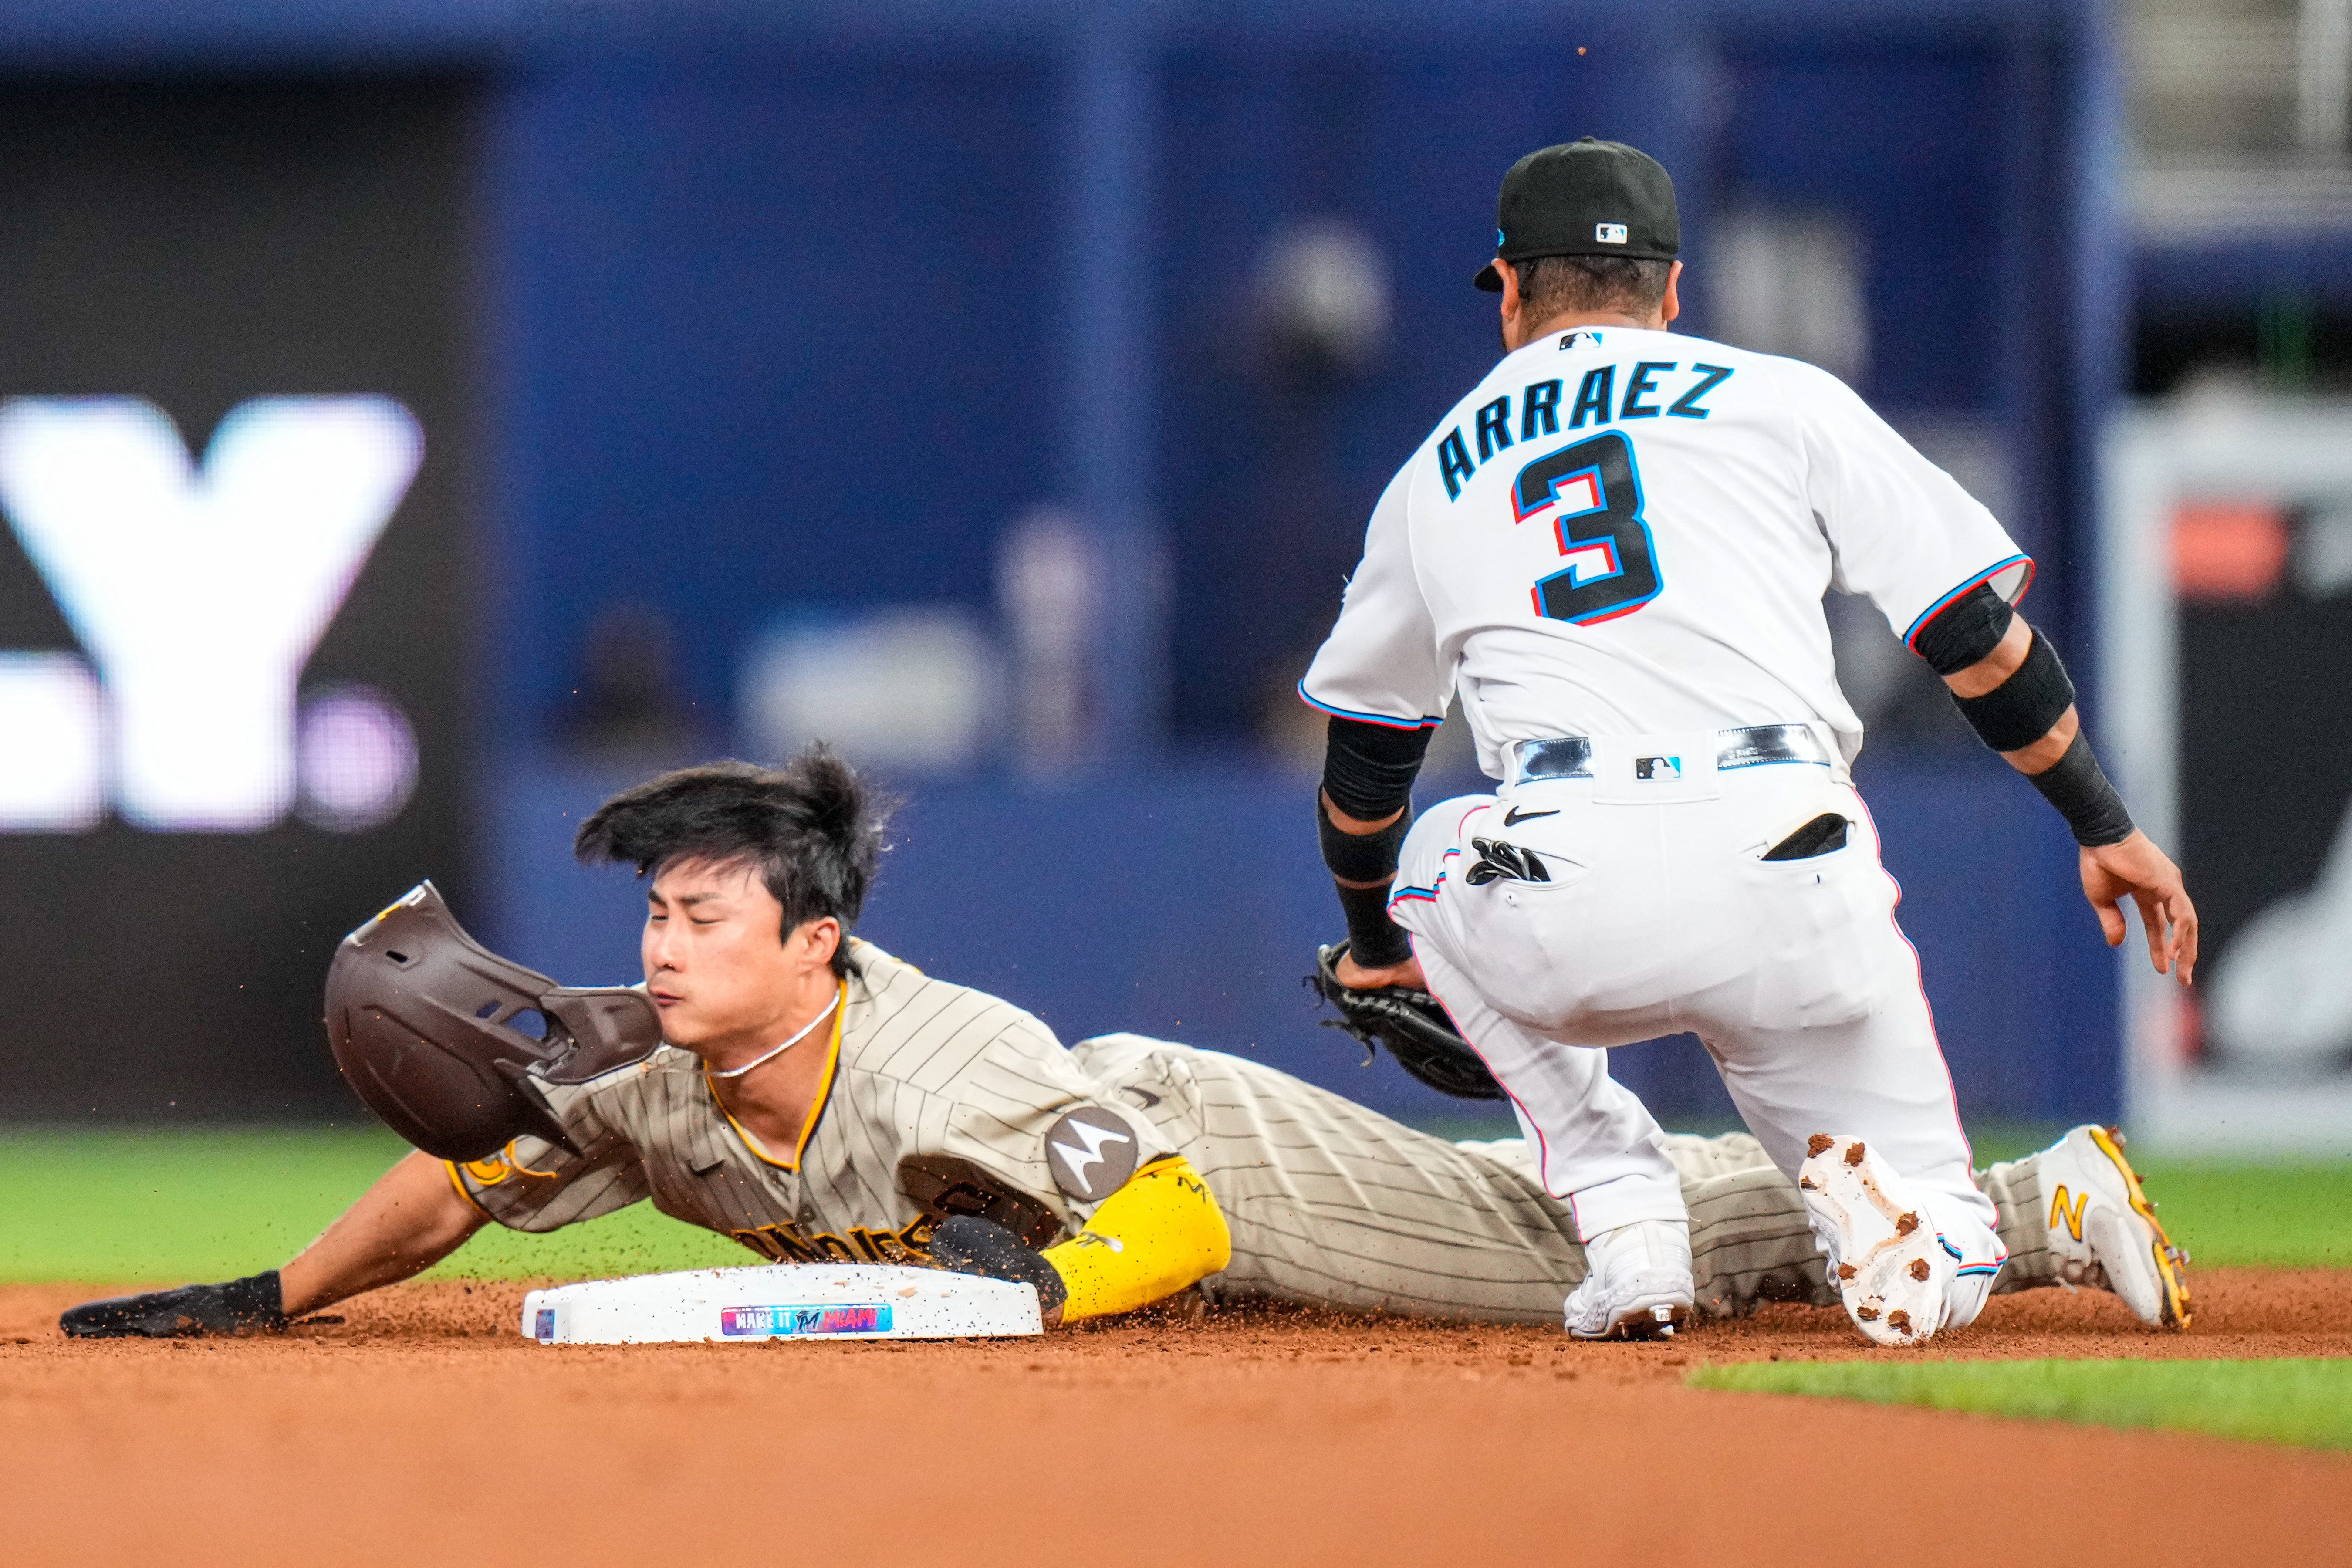 Jean Segura, Nick Fortes clutch up as Marlins rally past Padres